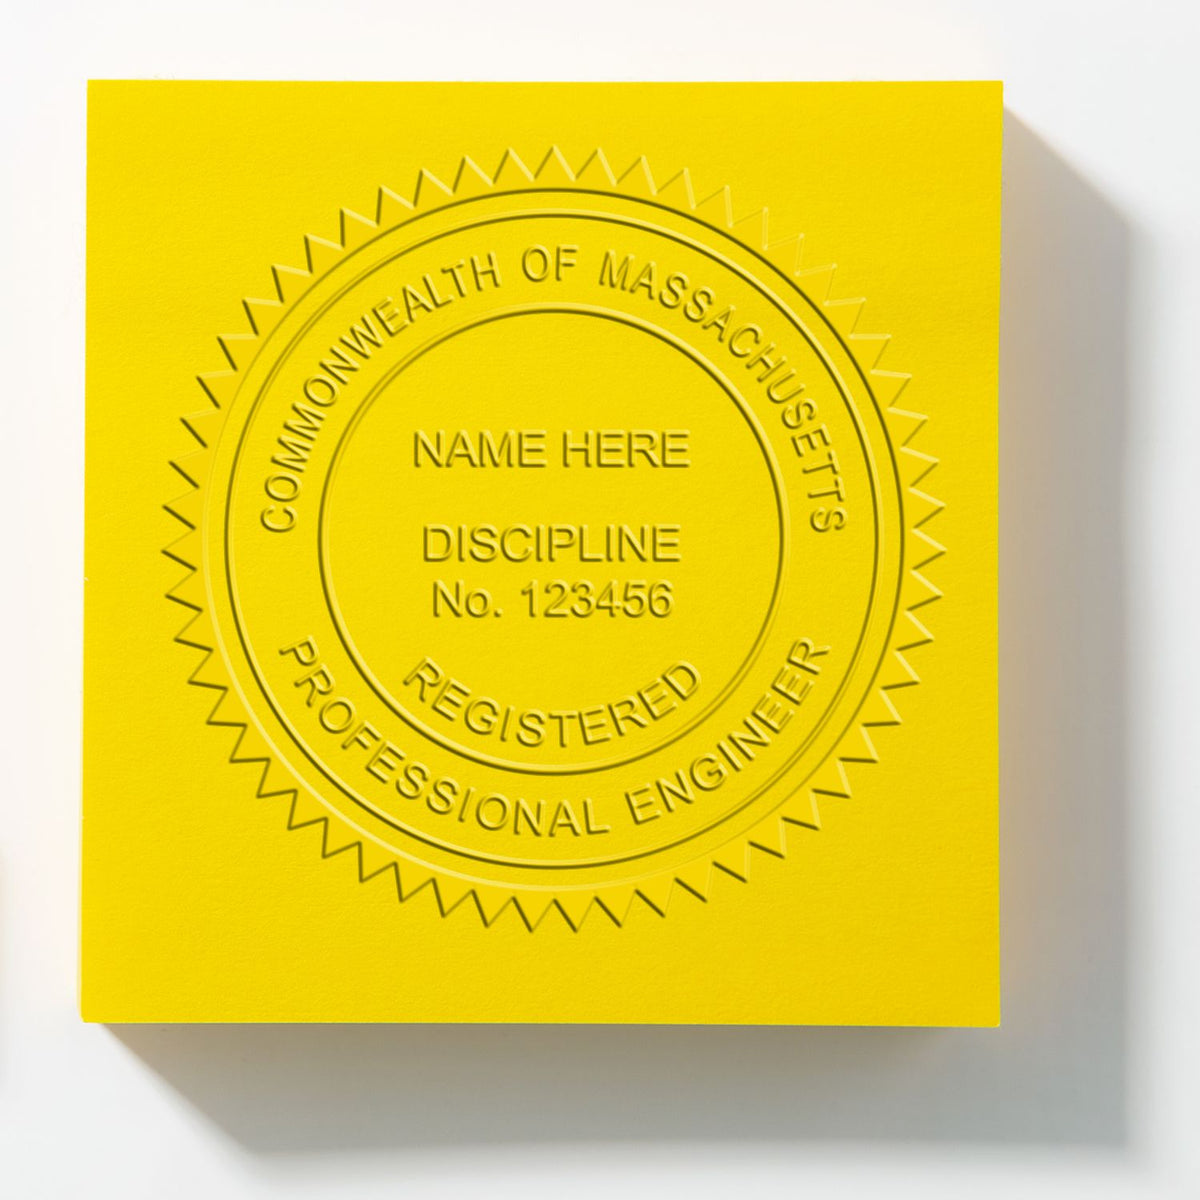 This paper is stamped with a sample imprint of the Massachusetts Engineer Desk Seal, signifying its quality and reliability.